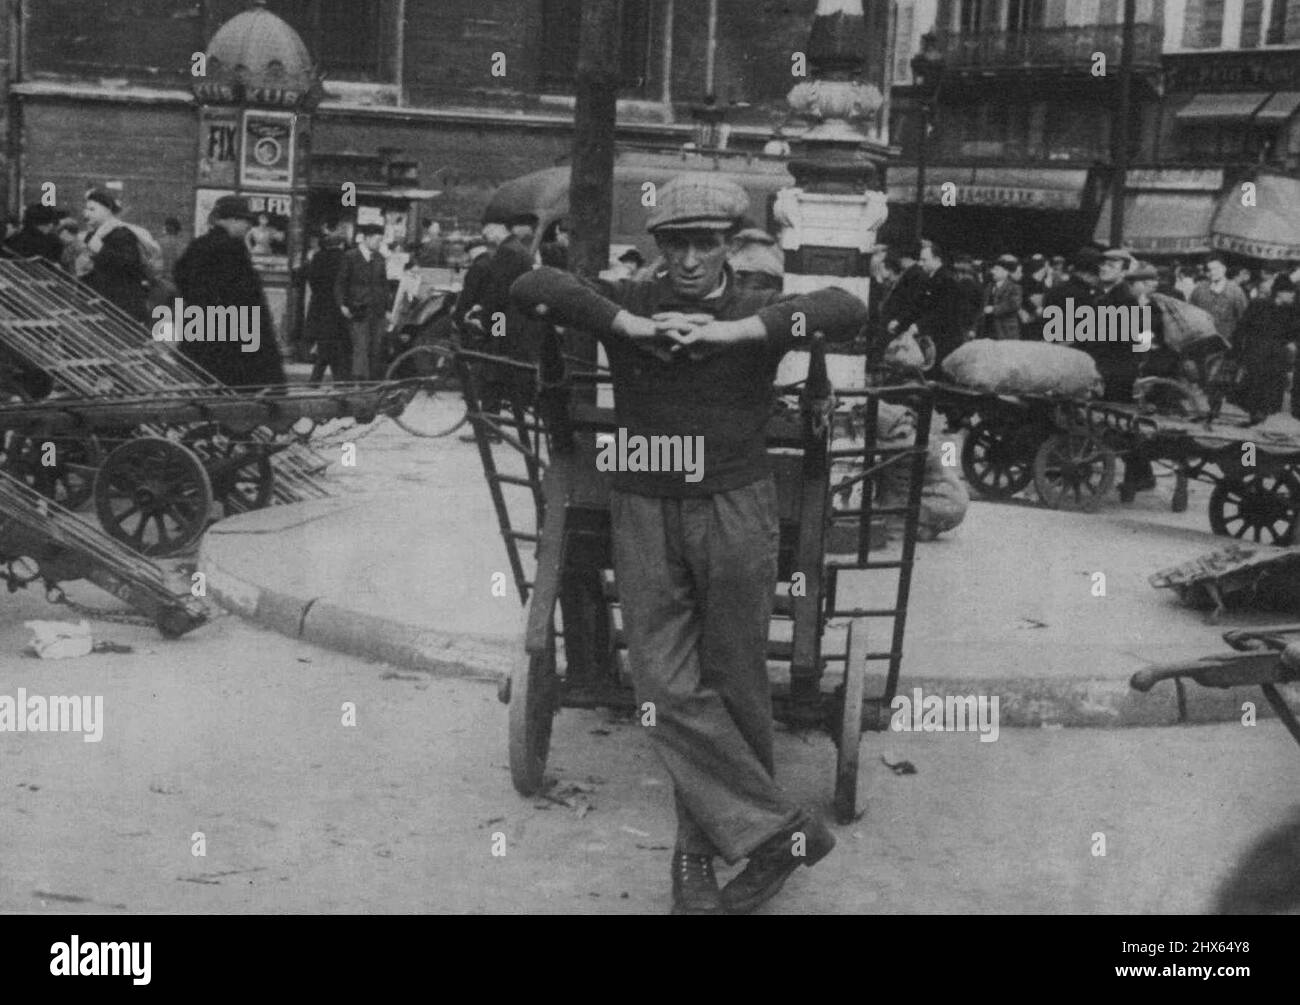 Paris under Two Years Nazi Rule -- Les Halles, The Covent Garden of Paris, was formerly full of vegetables, fruits and all sorts of eatables of agricultural France. Today, after two years of Nazi occupation, hand carts are lying by the curbs, empty, porters idle. August 06, 1942. (Photo by Keystone). Stock Photo